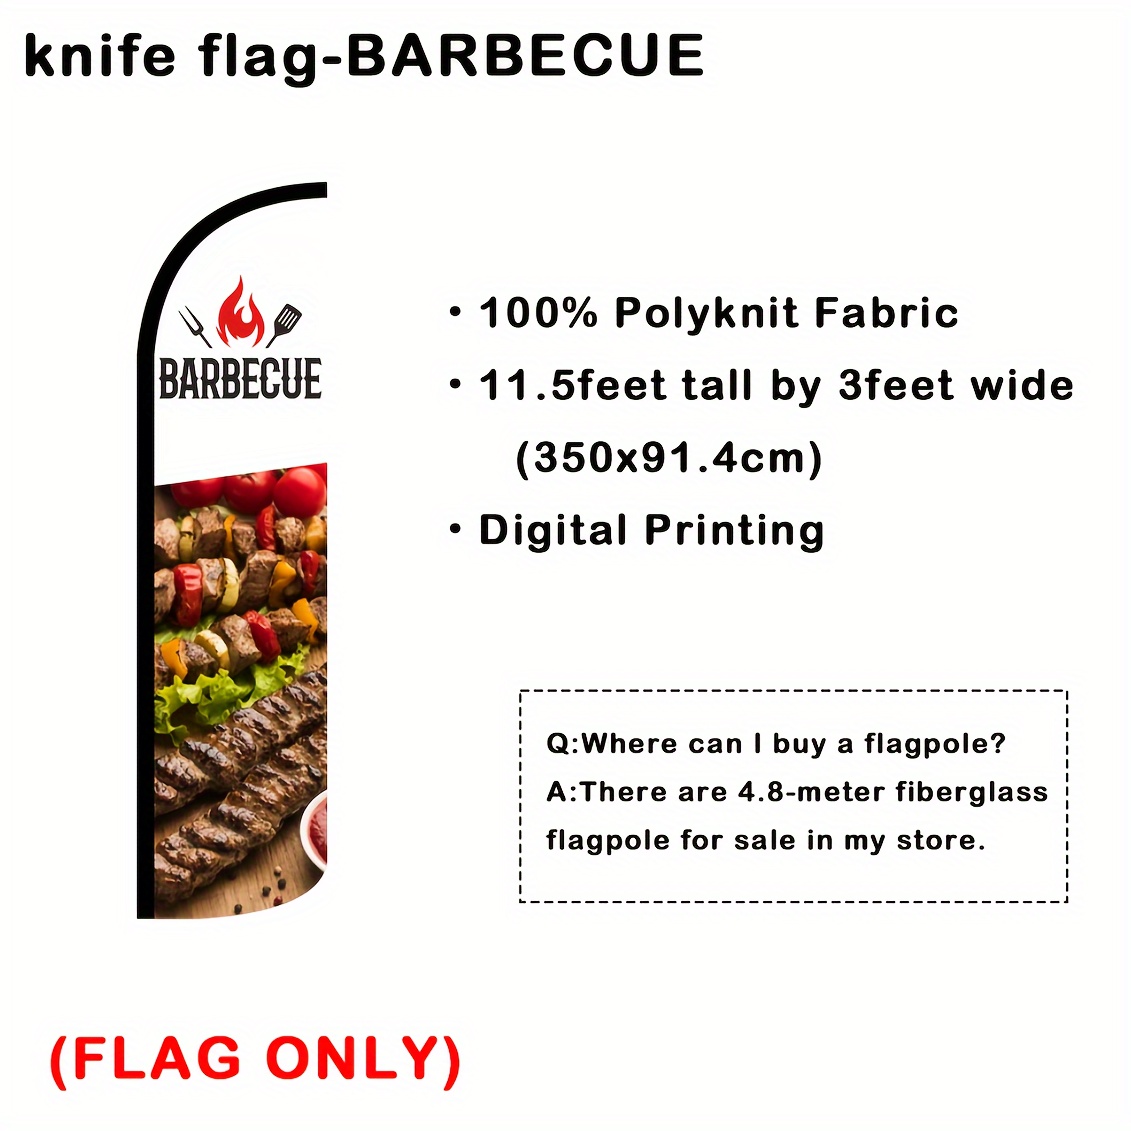 

1pc, Barbecue Advertising Knife Flag, The Size Is 3x11.5ft (91.4x350cm), The Material Is 110g/m2 By Weaving, Adopting Digital Printing Process, Suitable For Multiple Business And Event Scenes